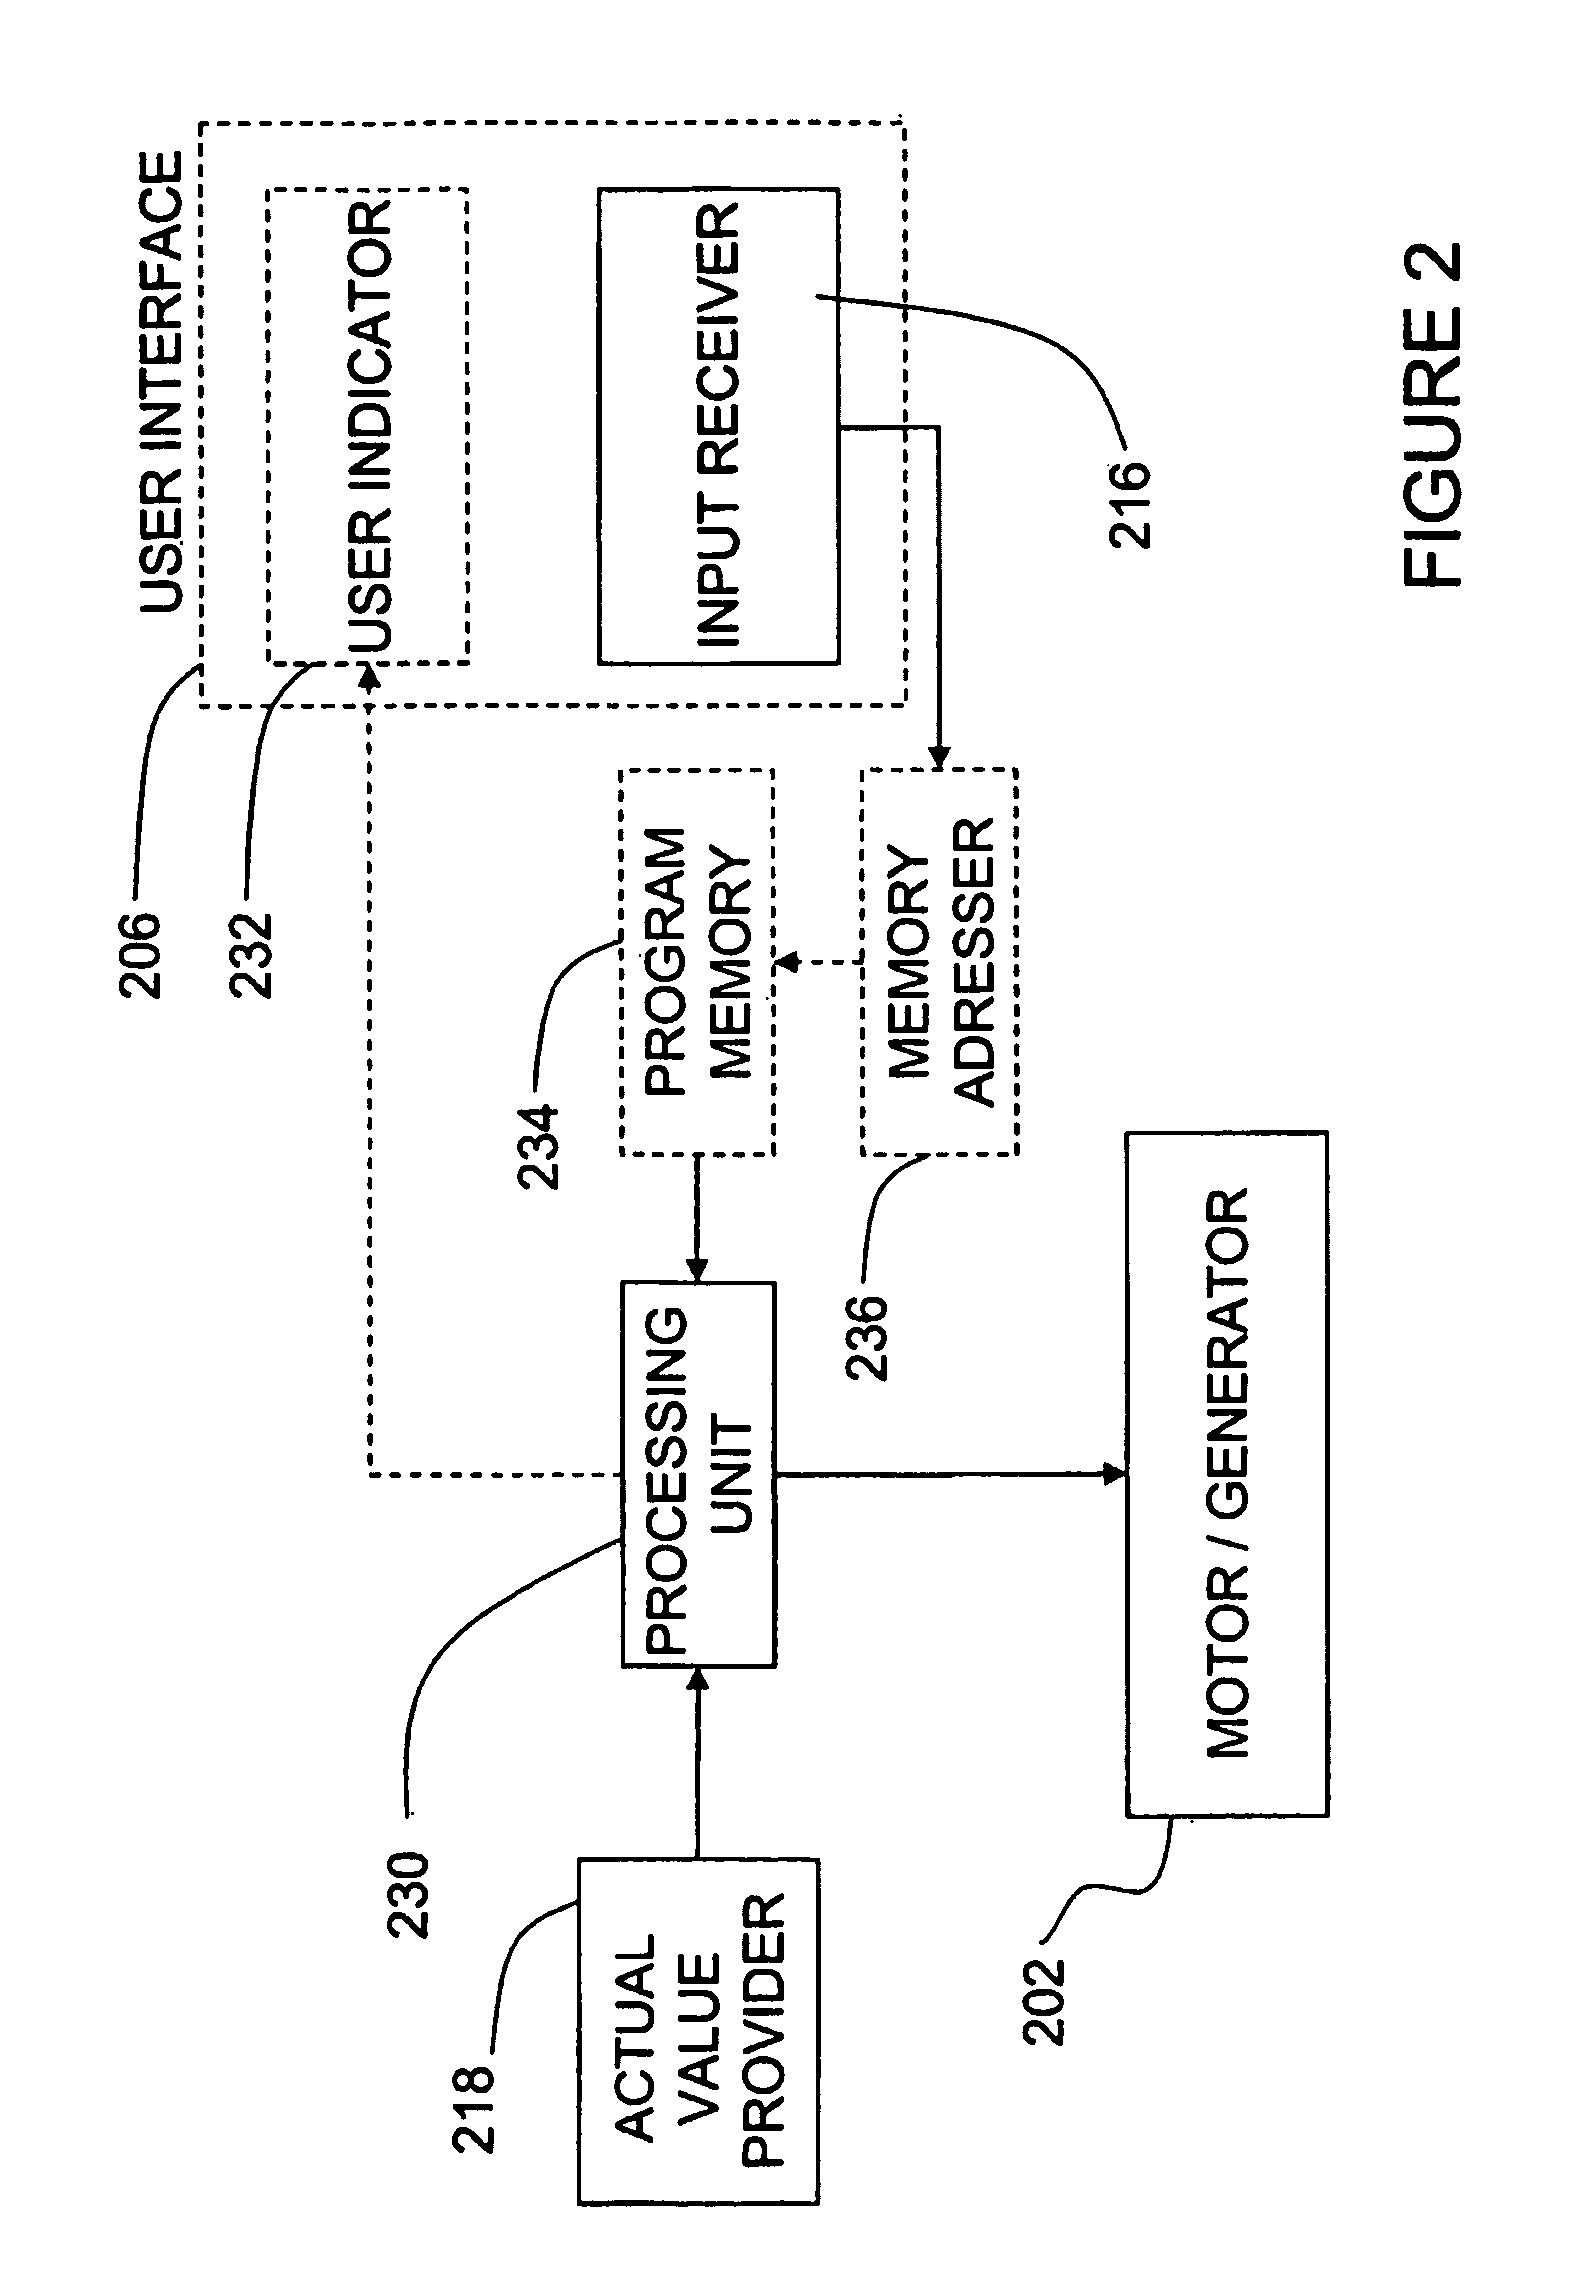 Energy management system for motor-assisted user-propelled vehicles